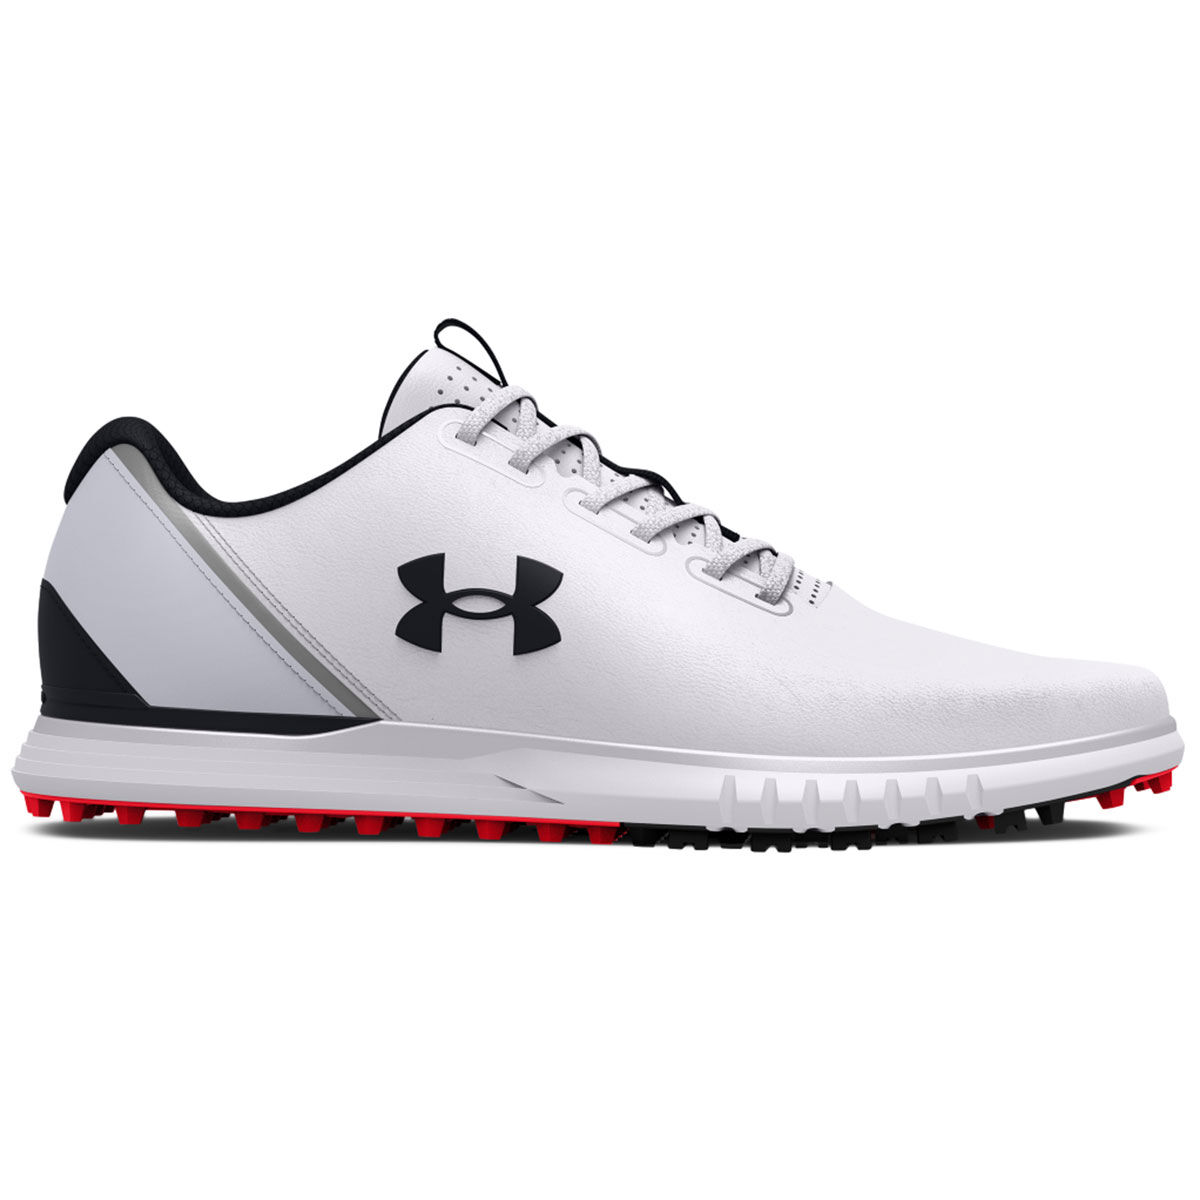 Under Armour Men’s Medal Waterproof Spikeless Golf Shoes, Mens, White/grey/black, 10 | American Golf